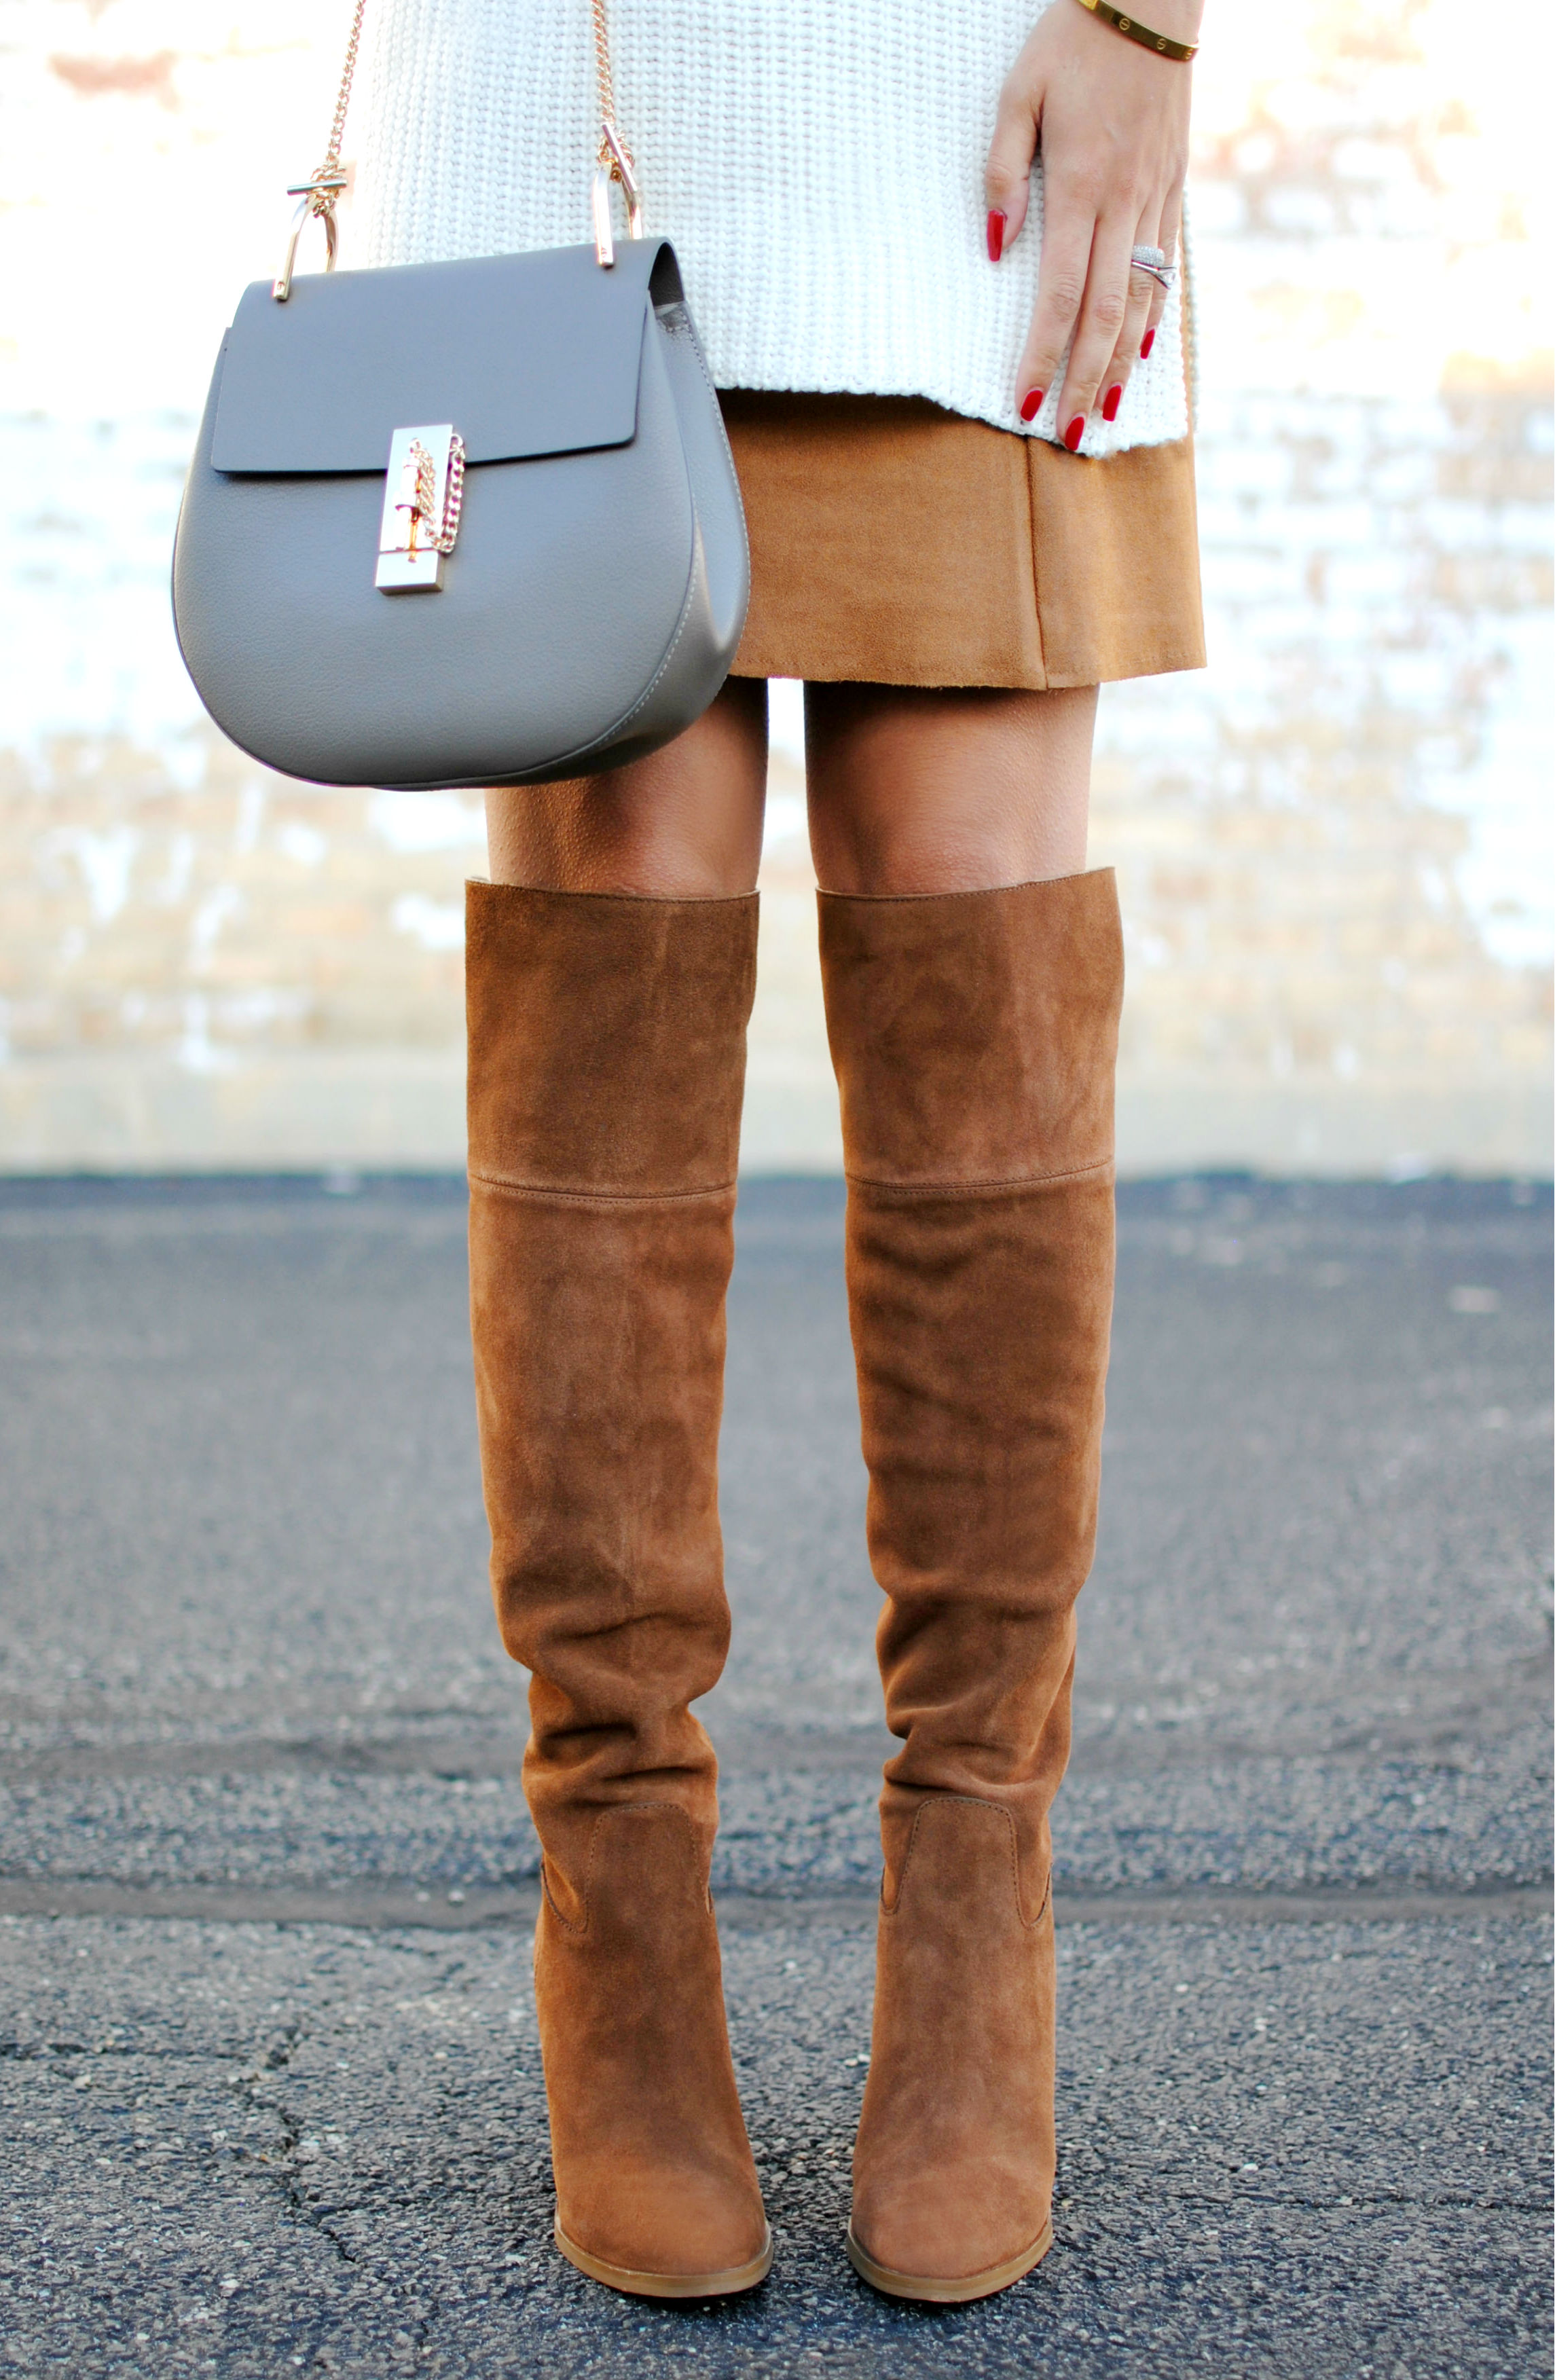 Michael Kors Tall Boots_Suede Skirt_Knit Sweater_What Would V Wear